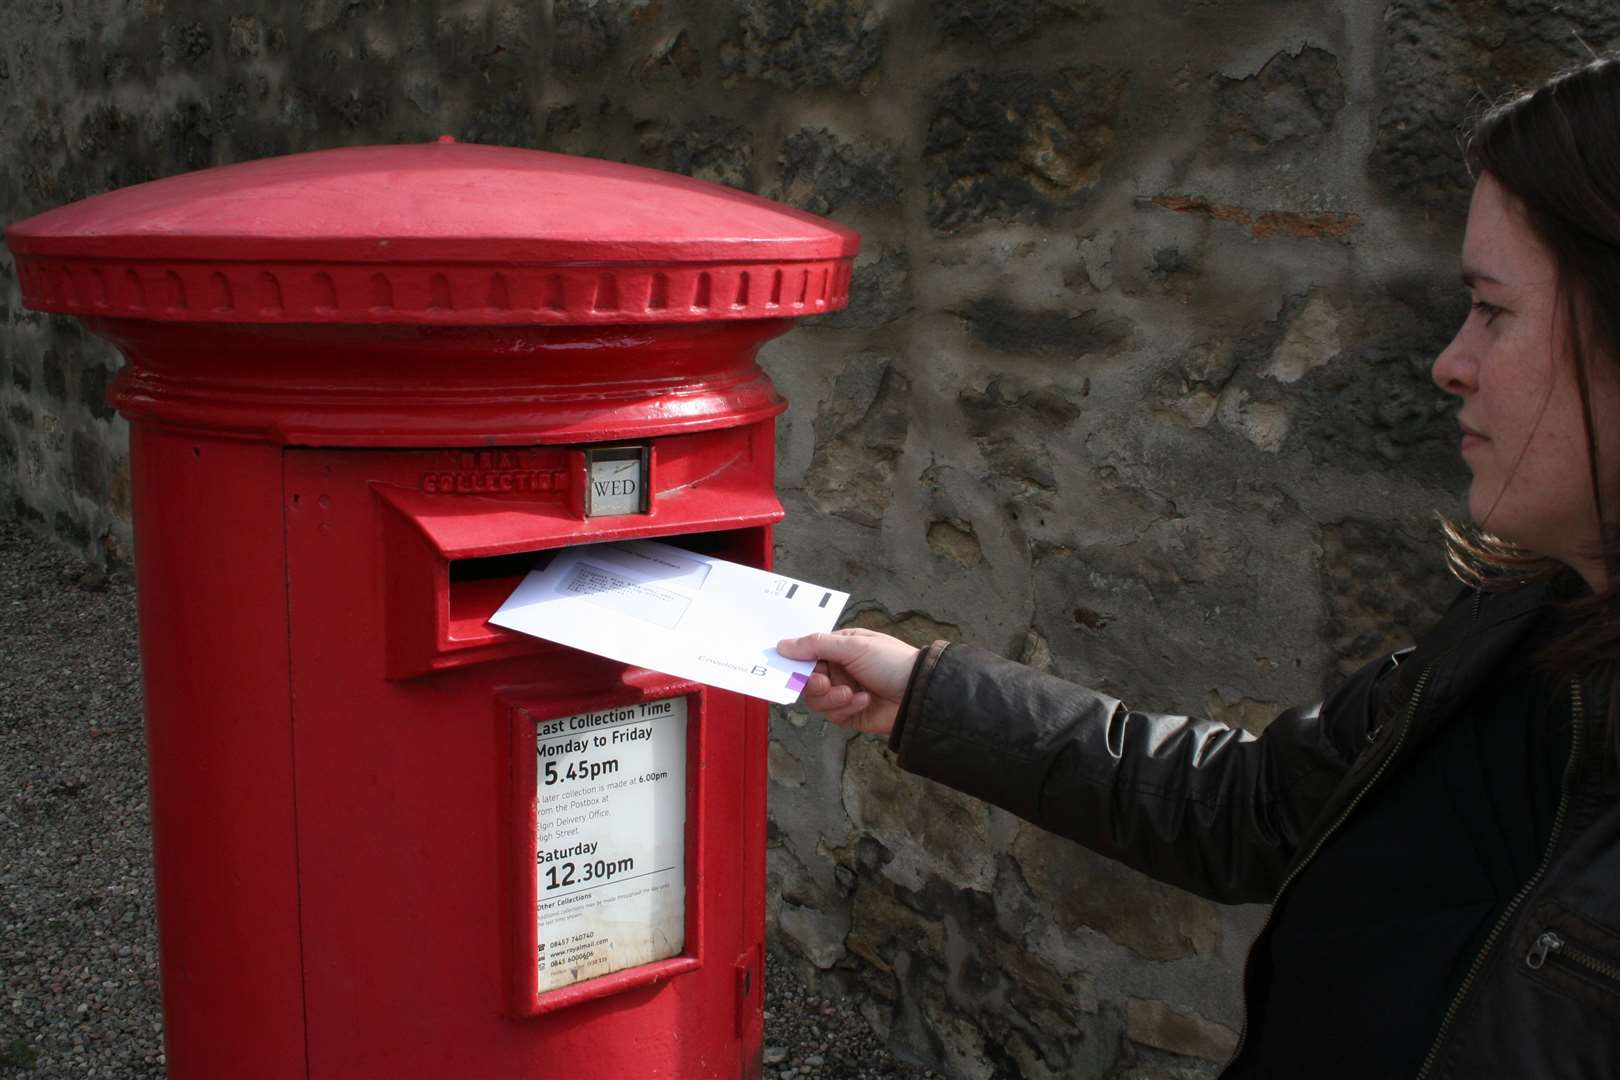 People who wish to vote by post for the first time must apply by April 6.